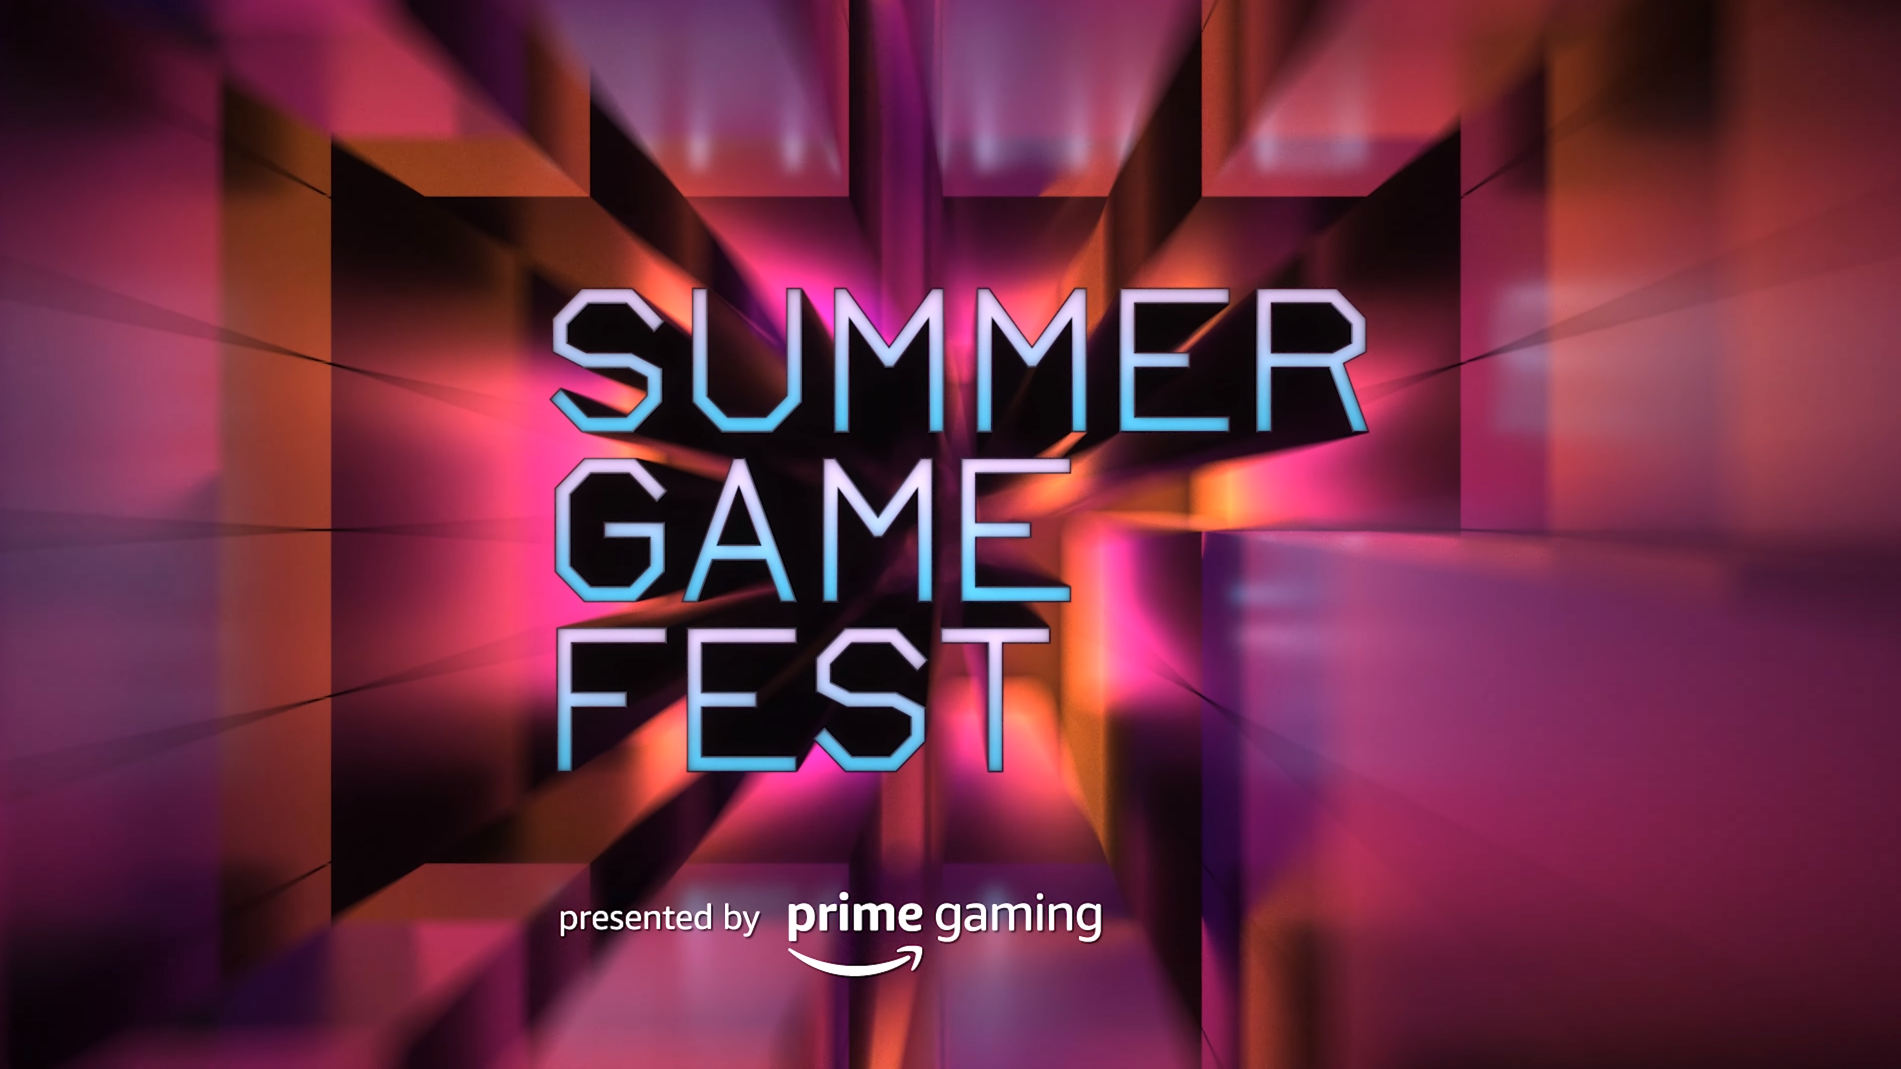 Summer Game Fest lineup confirmed to include PlayStation, Xbox and